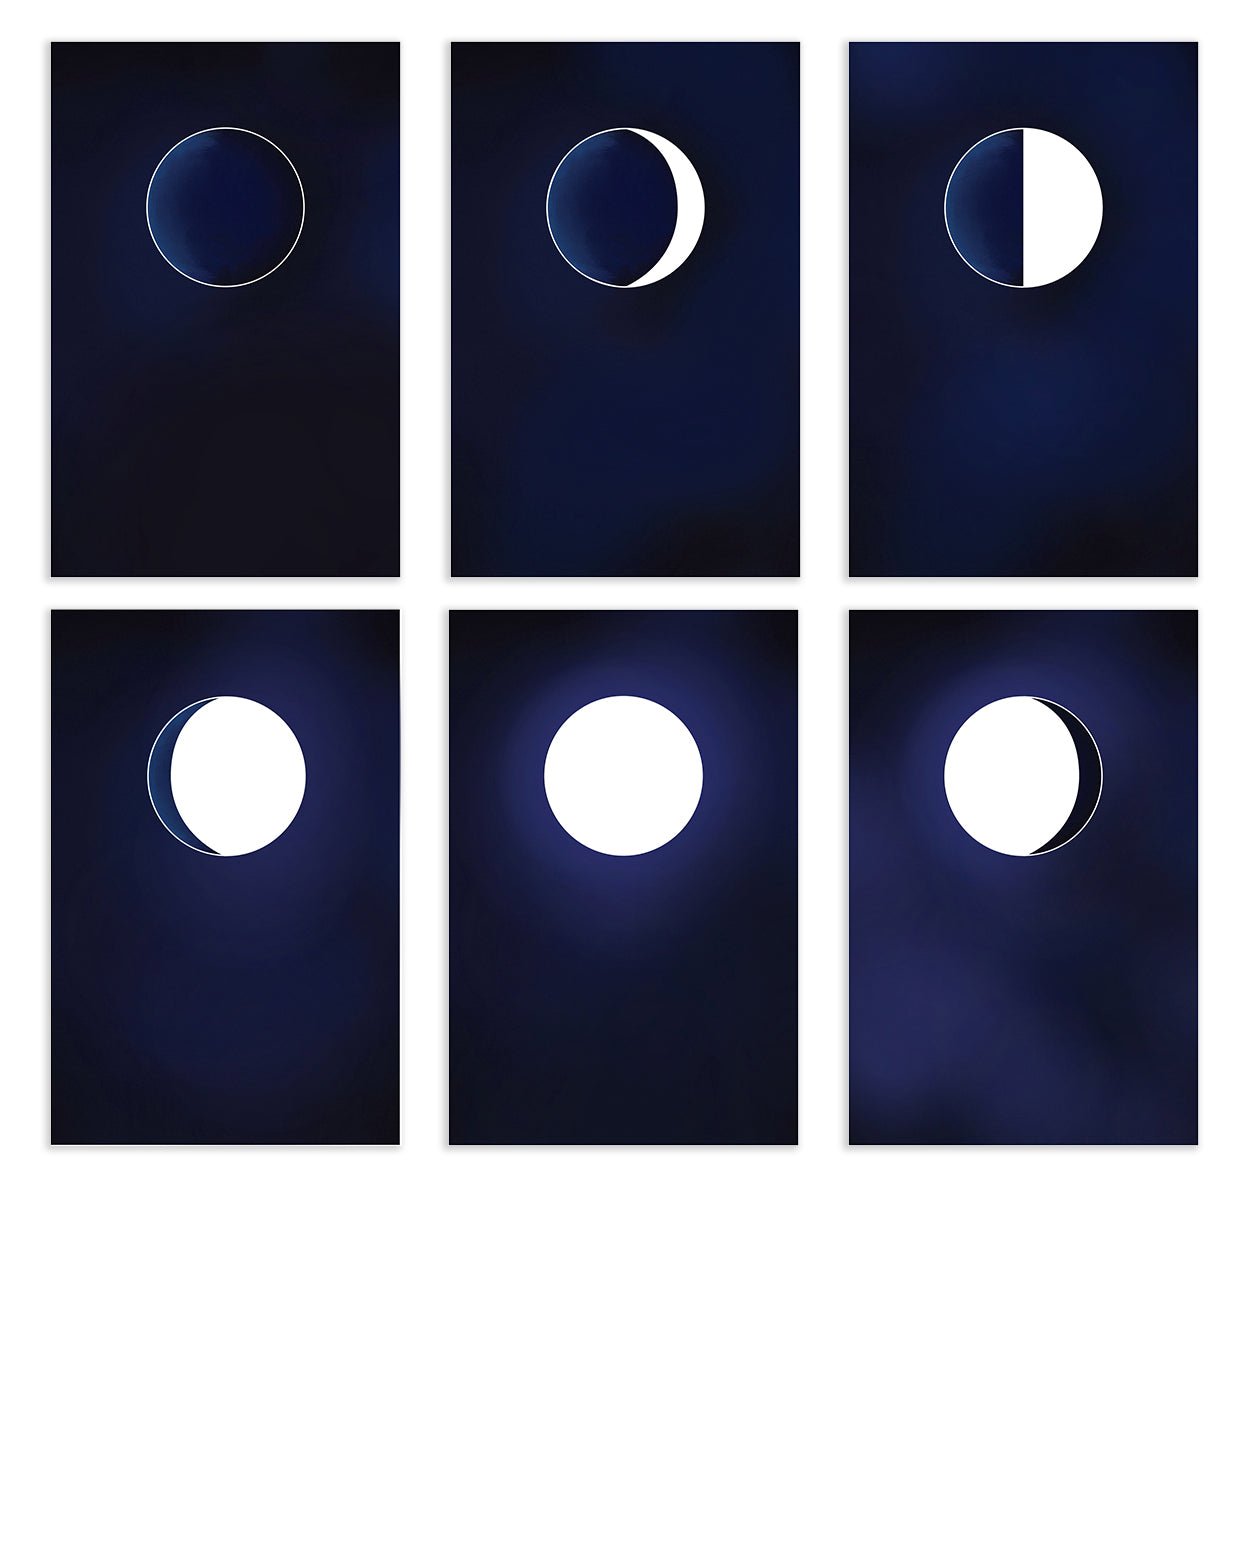 Phases of the moon postcards with dark blue backgrounds.